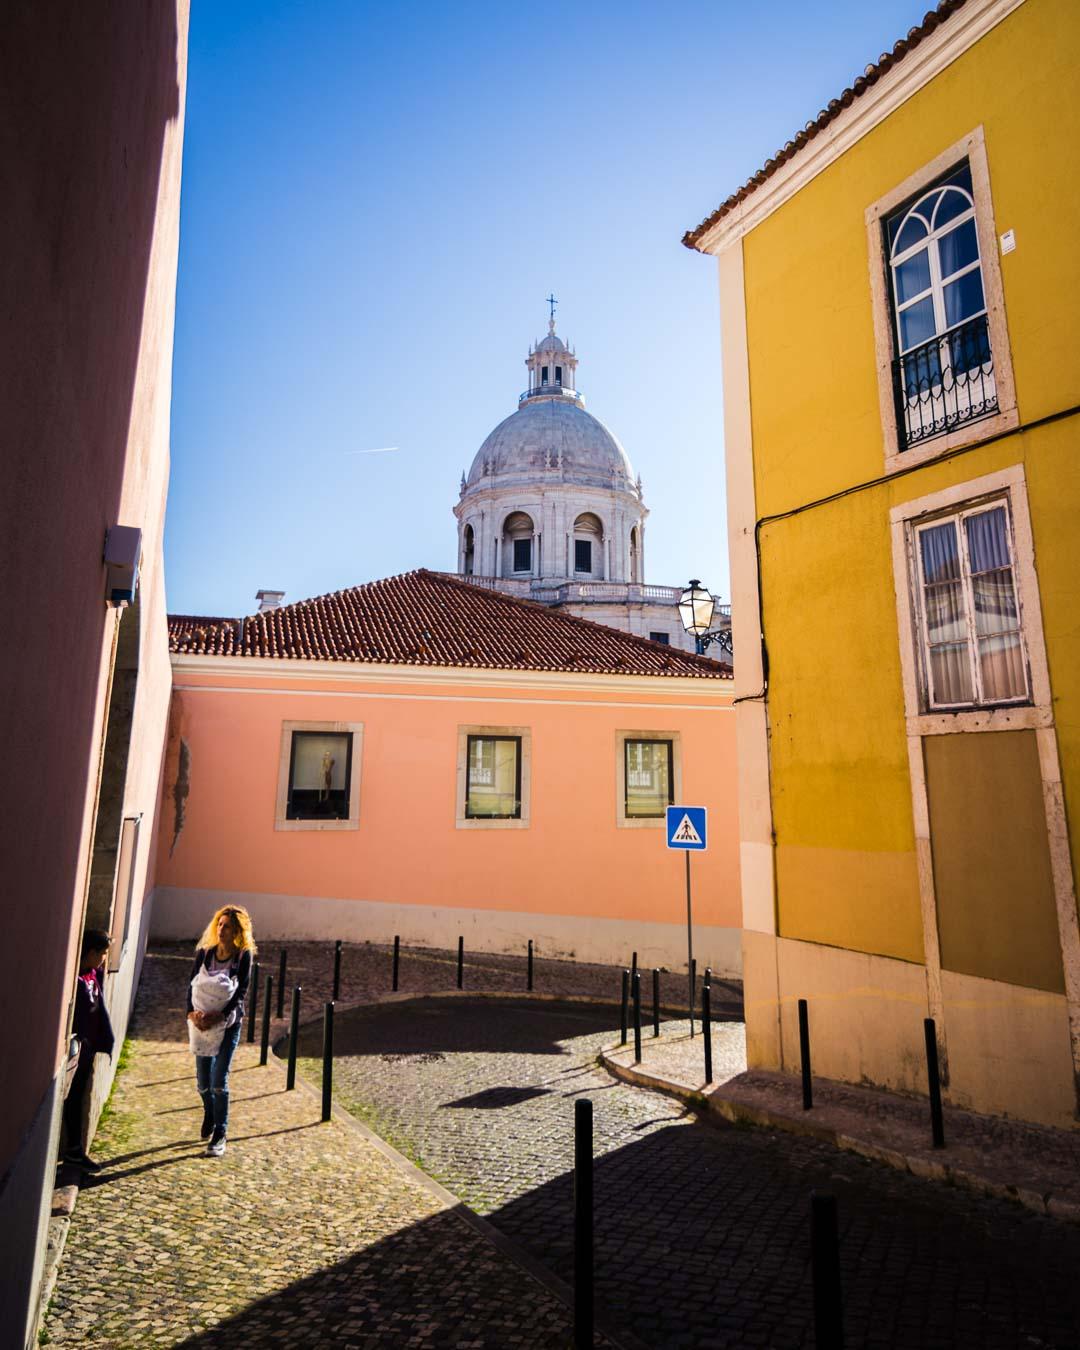 the white dome of the panteao nacional above the buildings of alfama